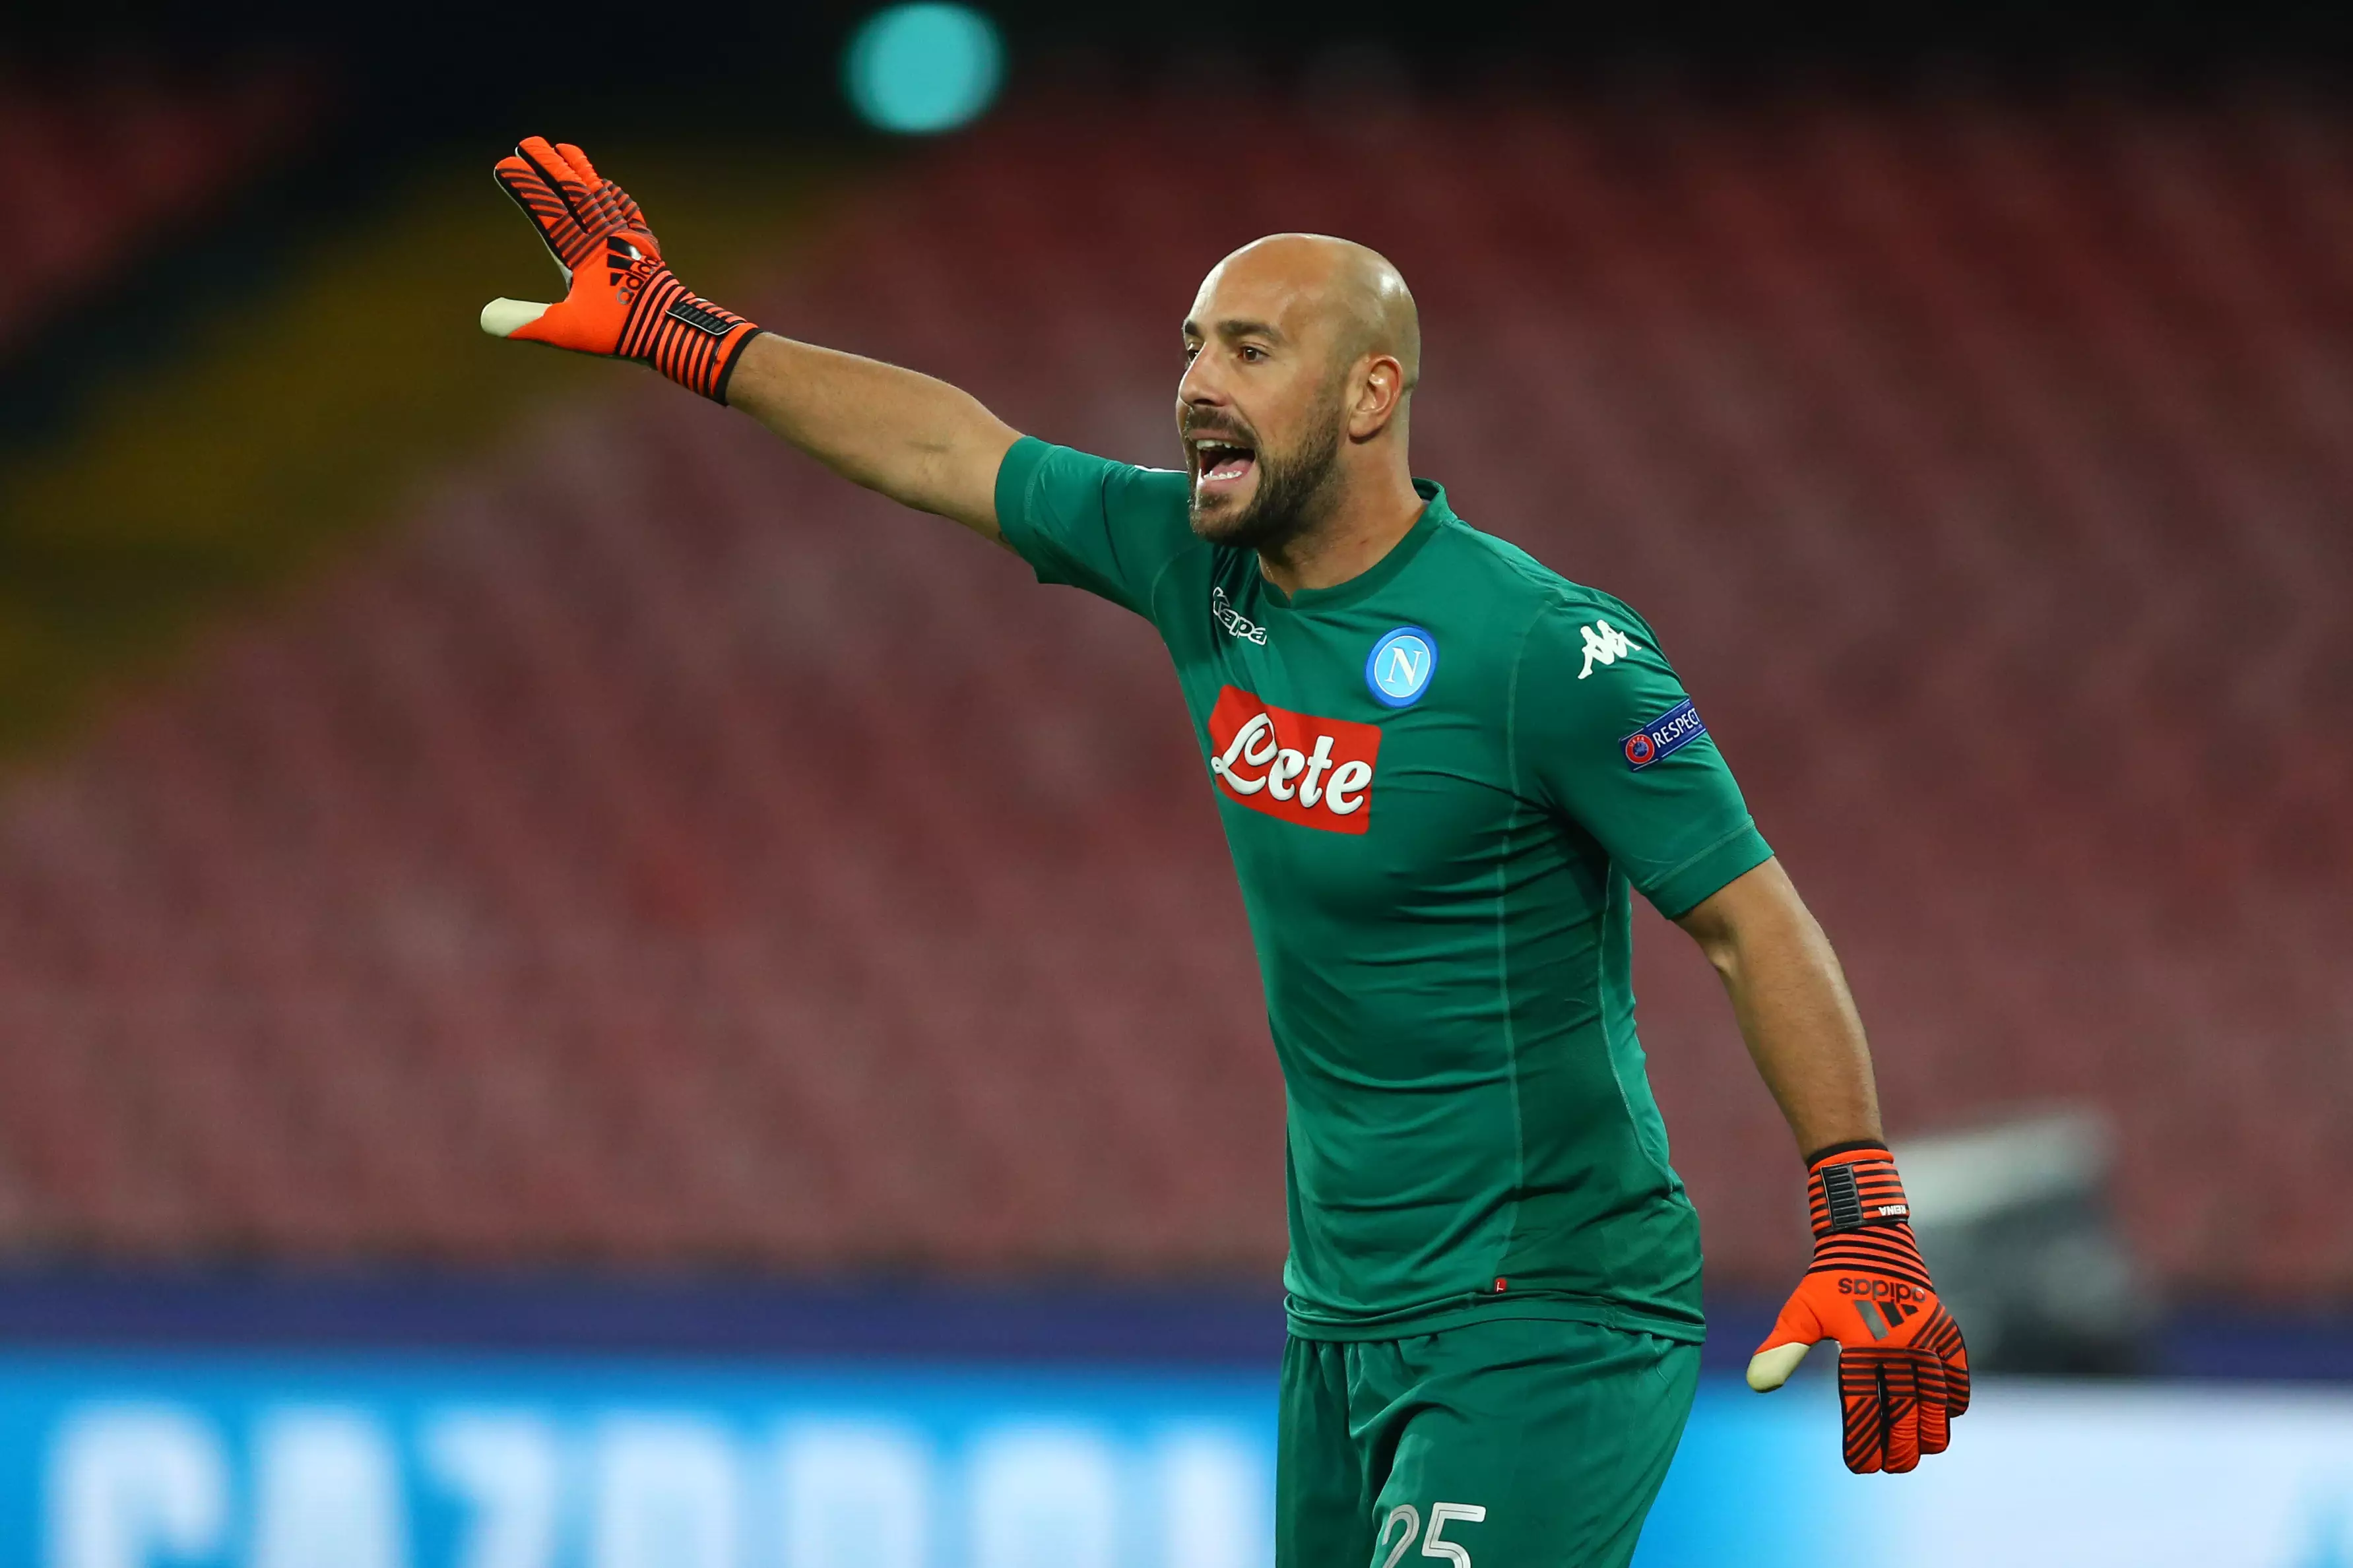 Reina in action for Napoli. Image: PA